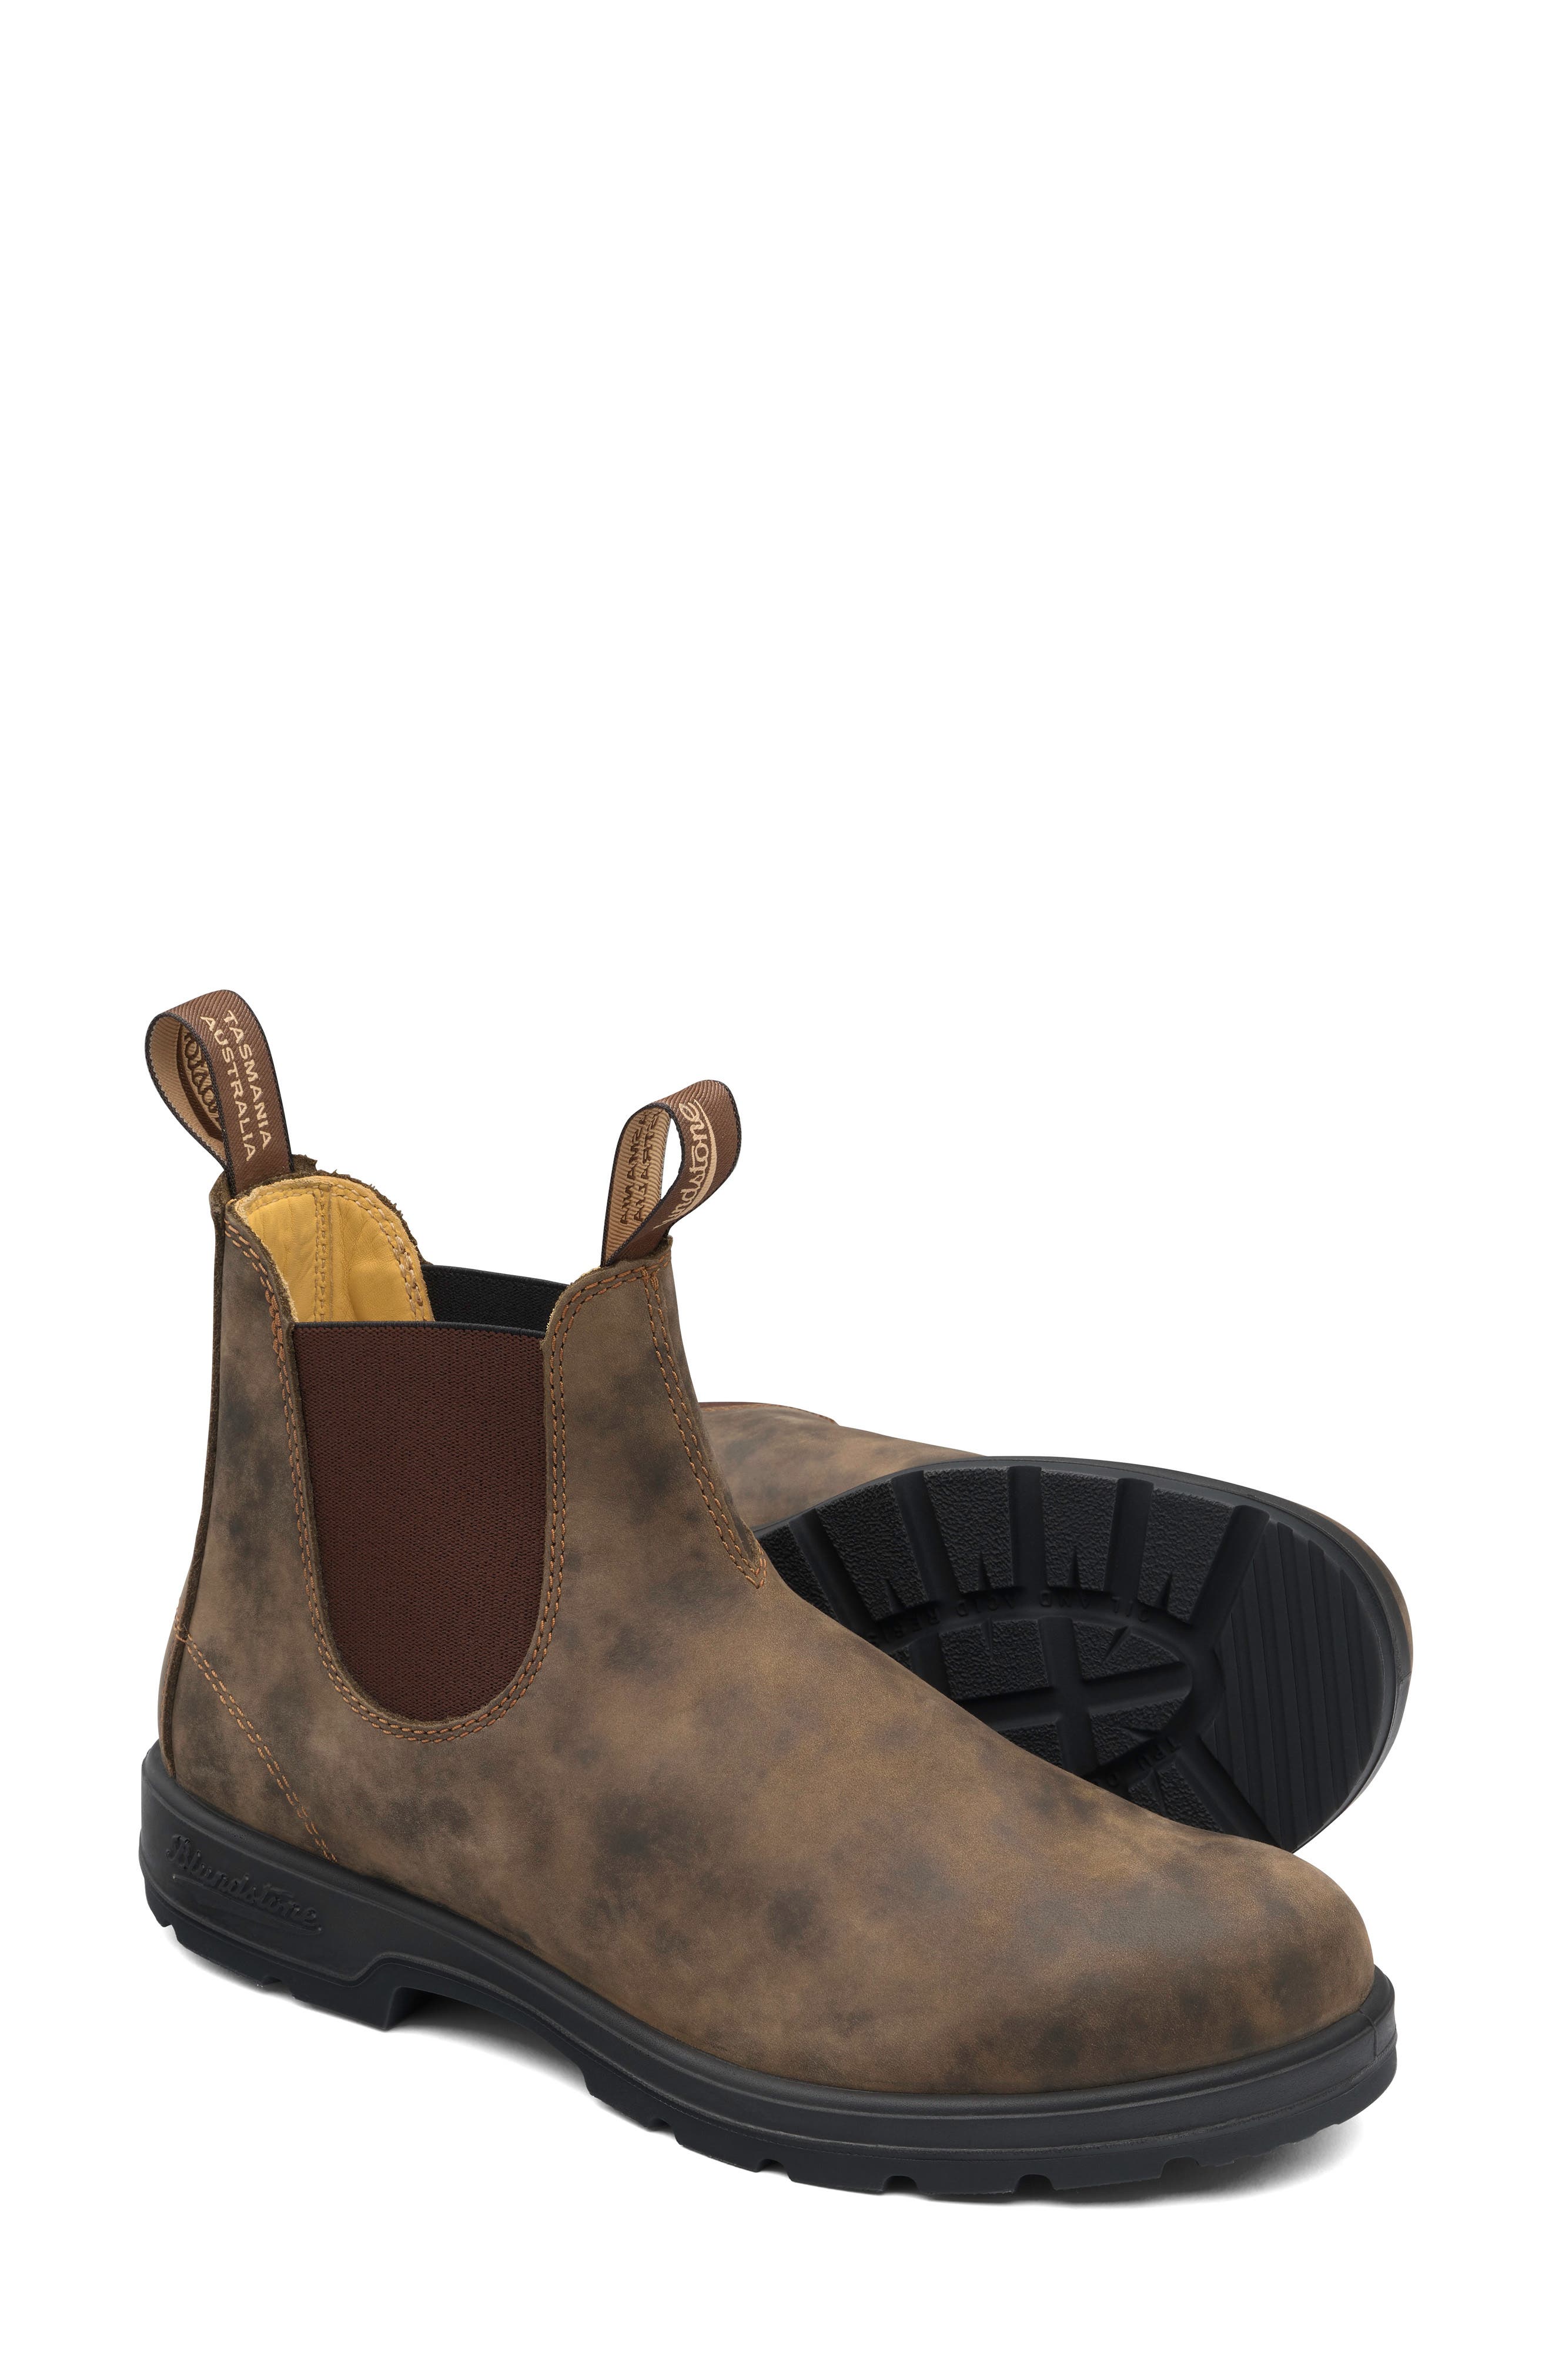 blundstone mens boots sale